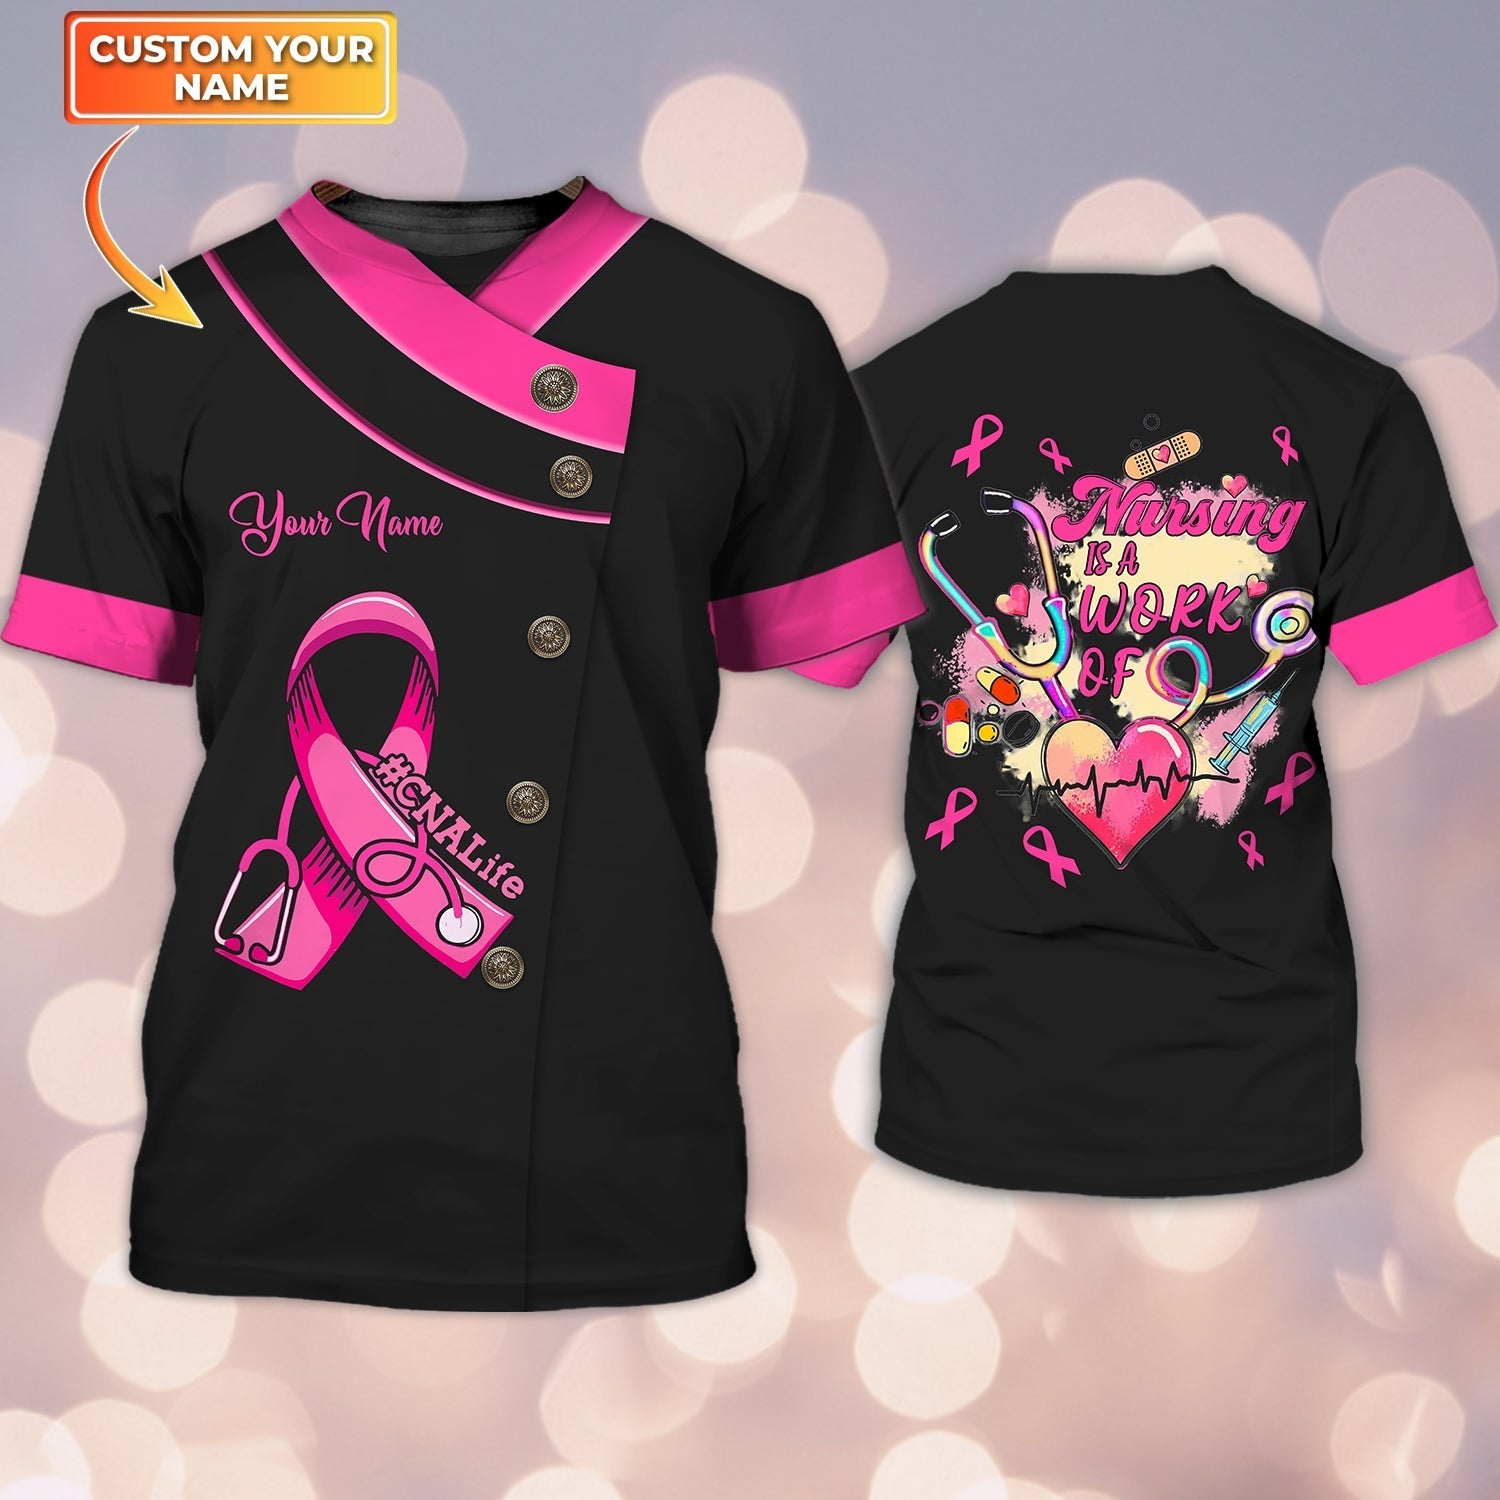 Personalized Name 3D Tshirt Tad Cnalife Breast Cancer Awareness Shirts